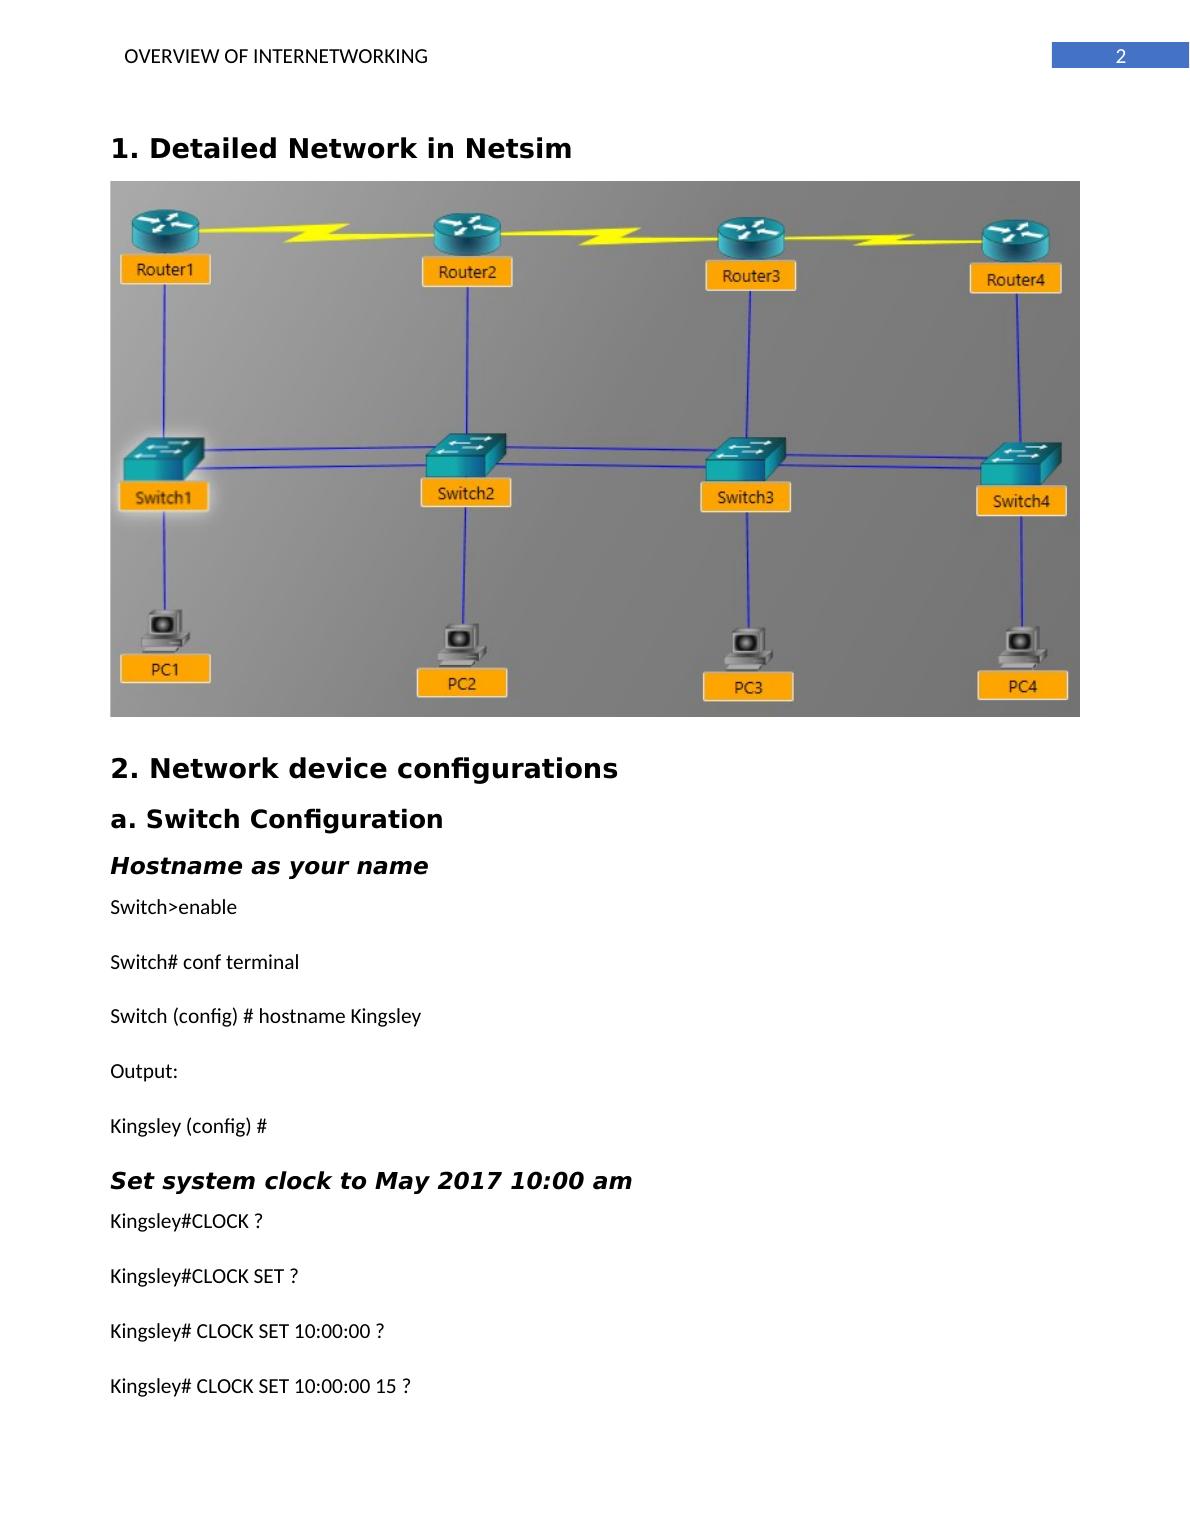 Detailed Network Configuration and System Clock to May 2017 10:00 am_3